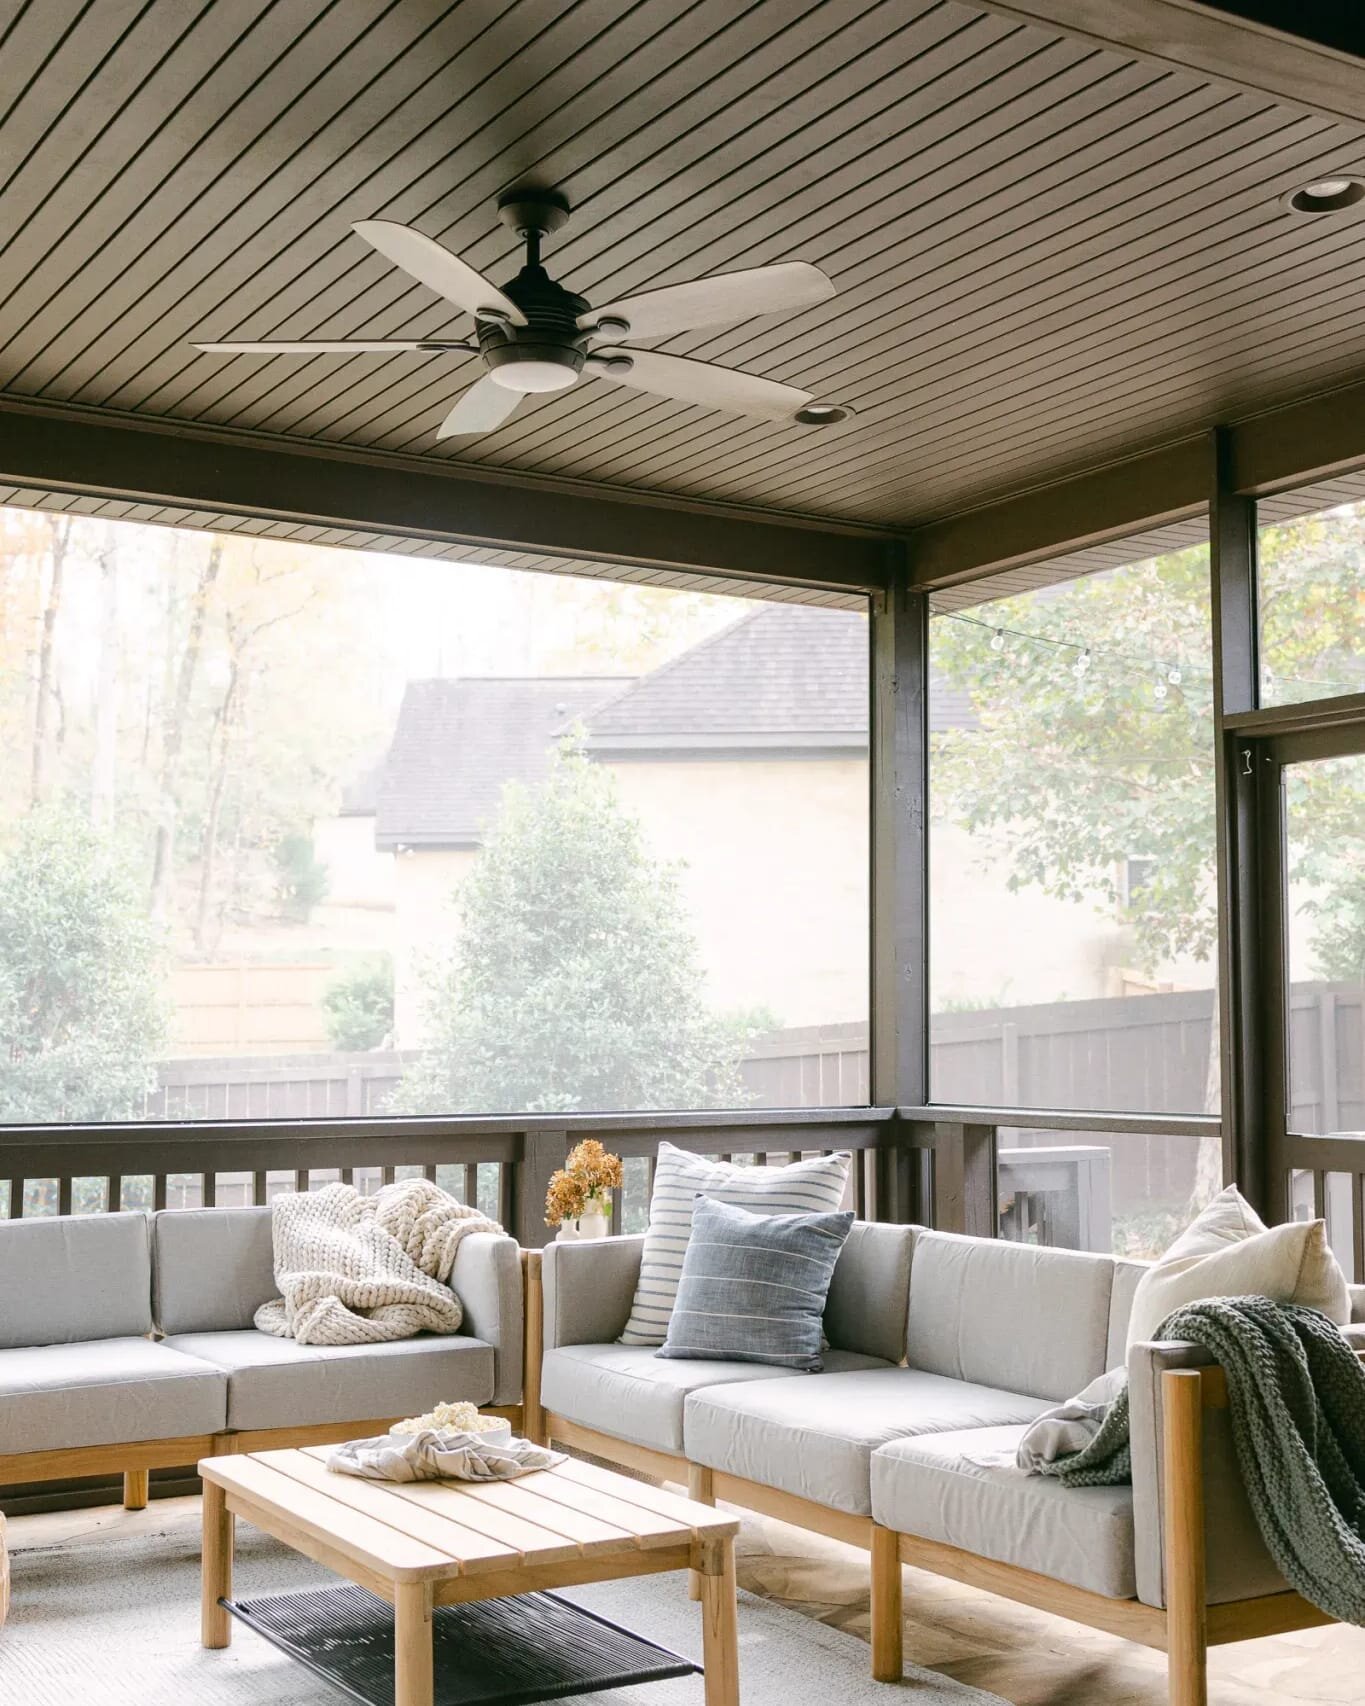 Can you believe we're already on week 5 of the ORC? Don't forget to catch up on everyone's progress via the link in our bio! 😁⁣
This stunning covered porch is by @ellen_wags from the fall '22 ORC. By adding screens and some gorgeous outdoor furnitur